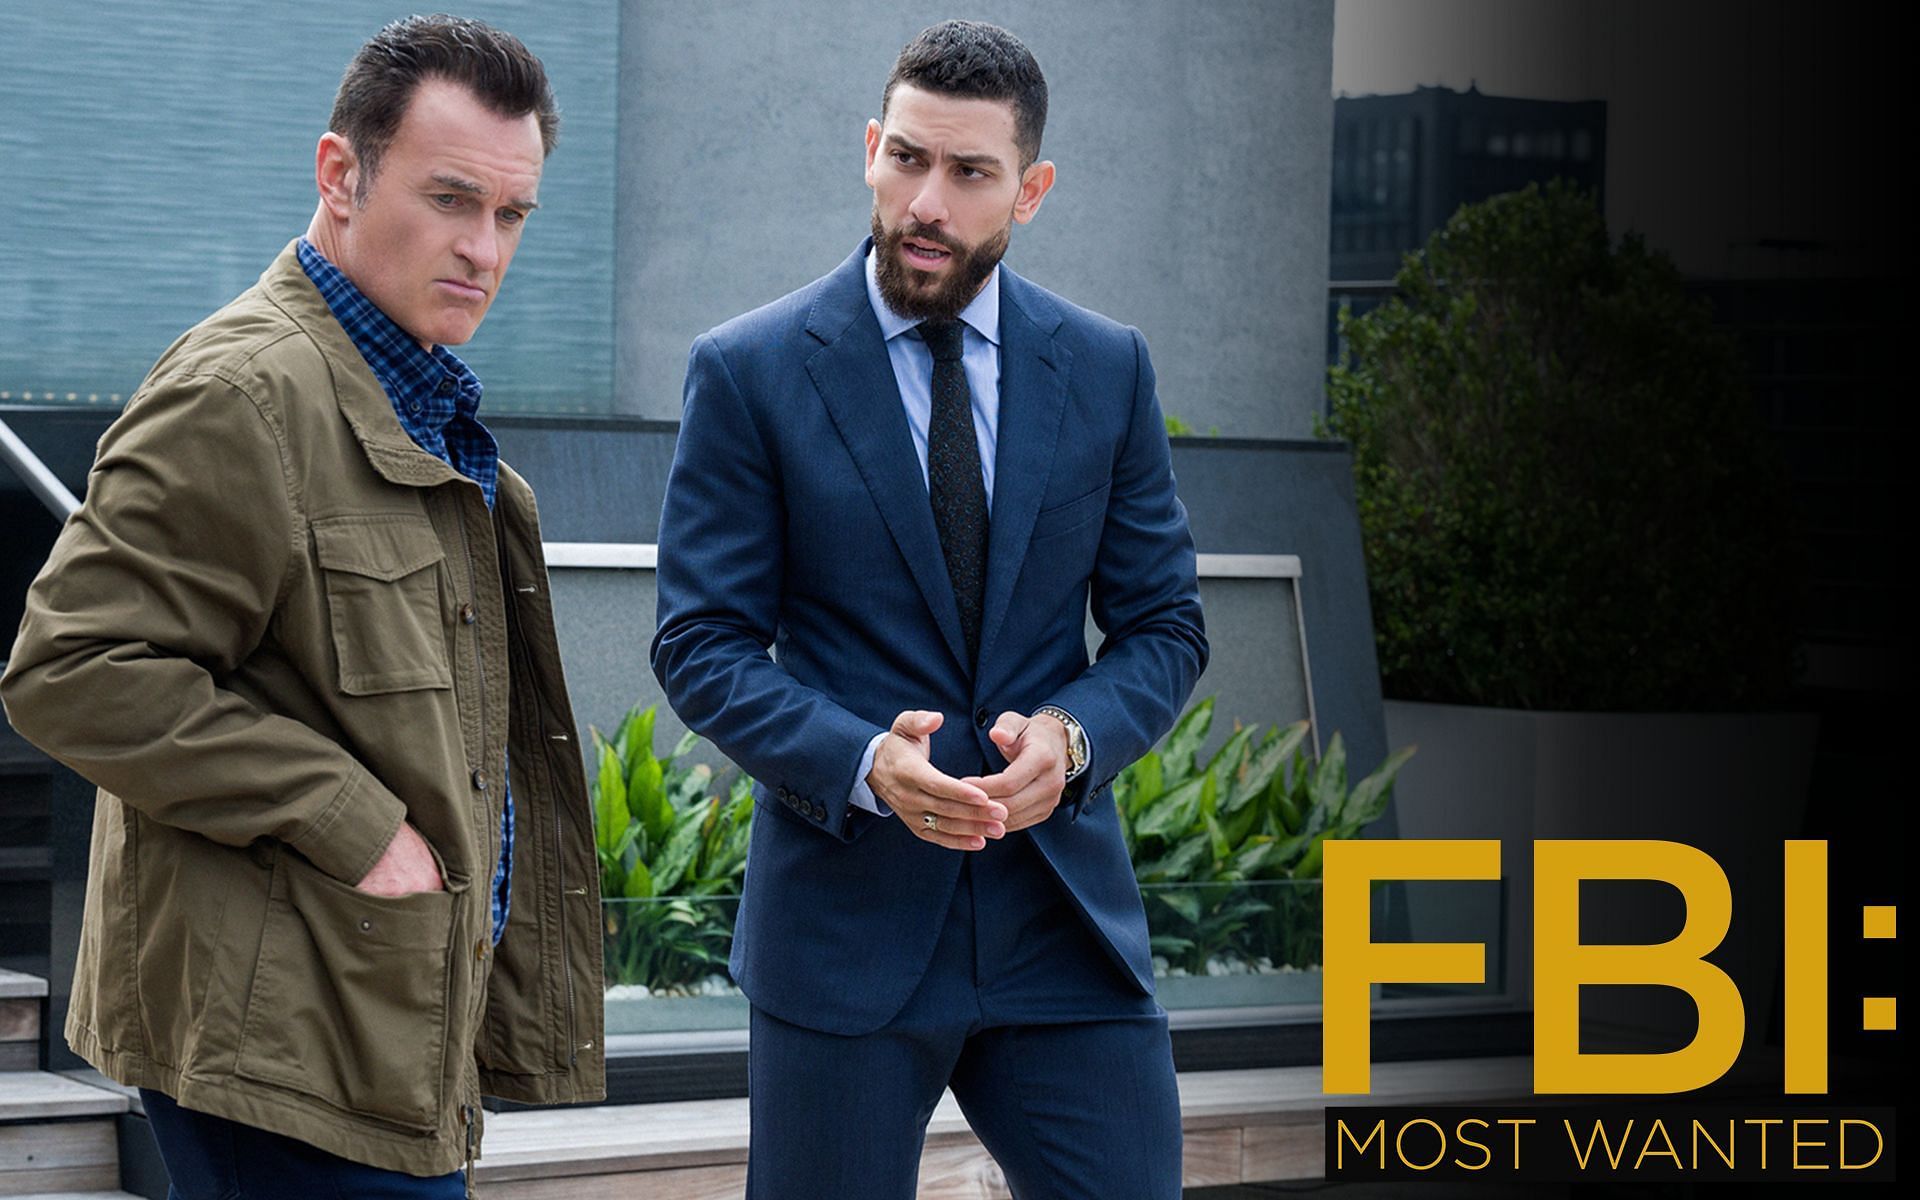 Episode 22 of FBI: Most Wanted Season 3 will premiere on May 24, 2022, on CBS at 10.00 PM ET (Image via CBS)